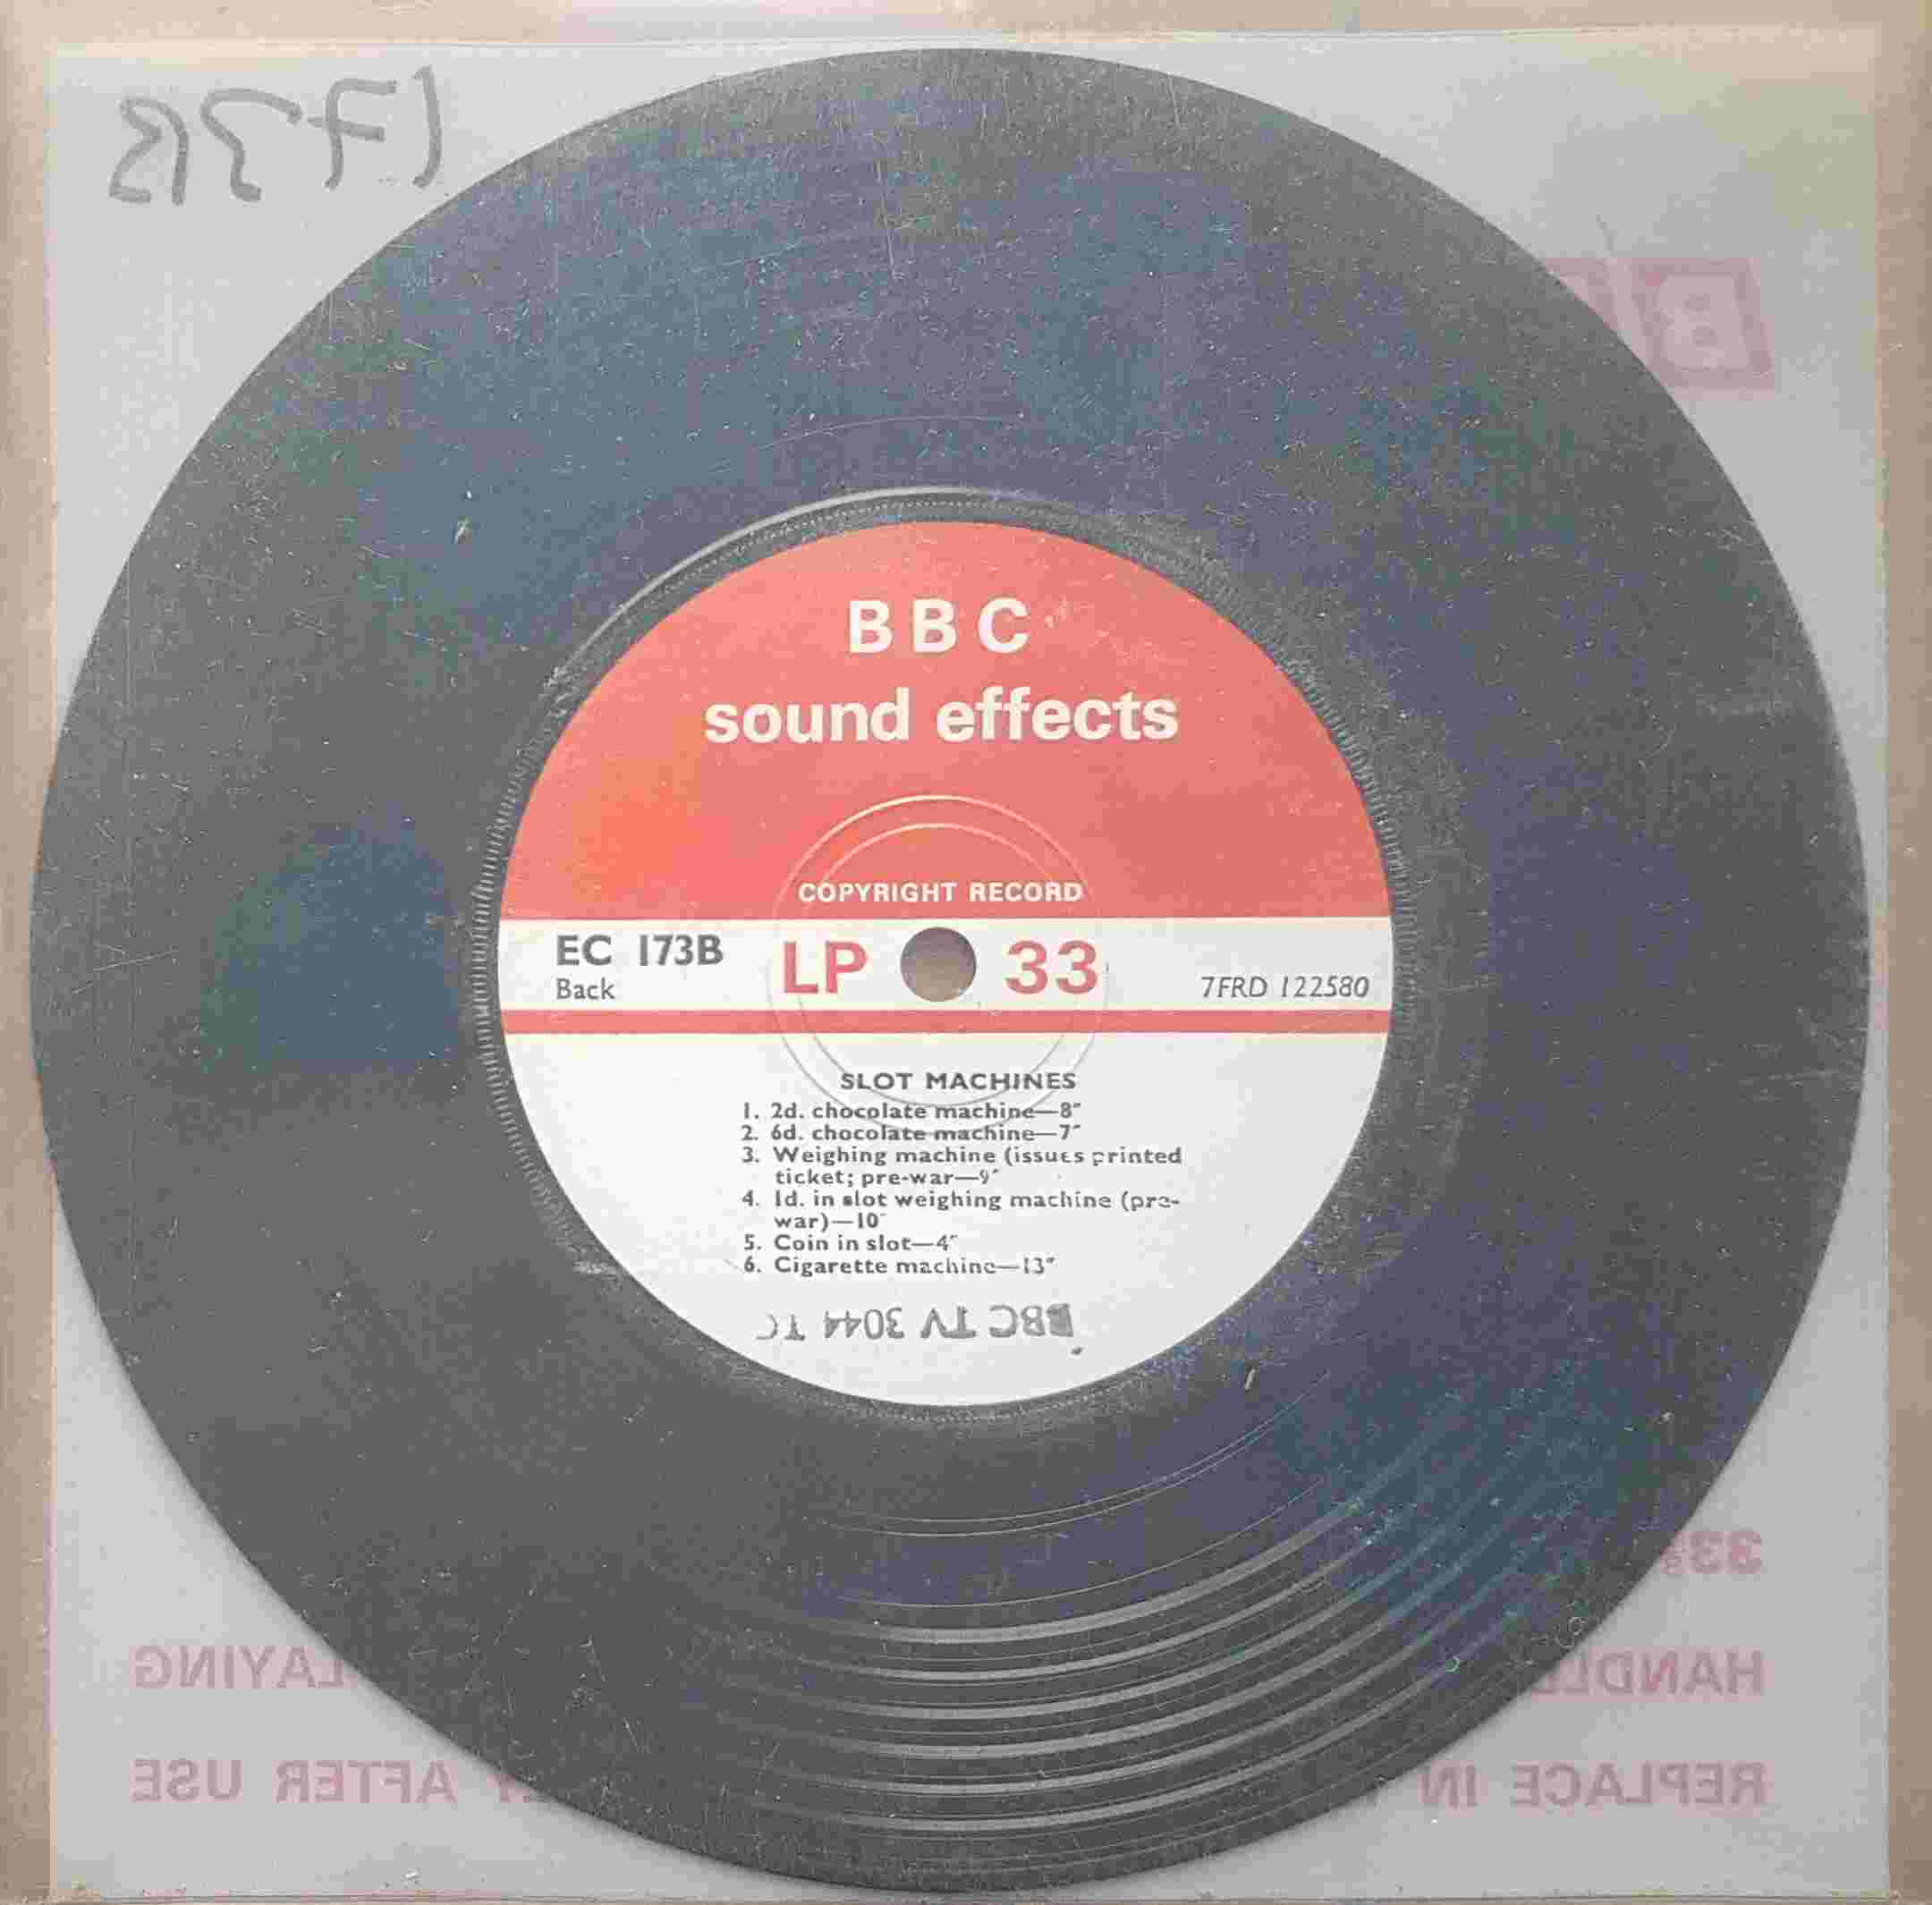 Picture of EC 173B Slot machines by artist Not registered from the BBC records and Tapes library